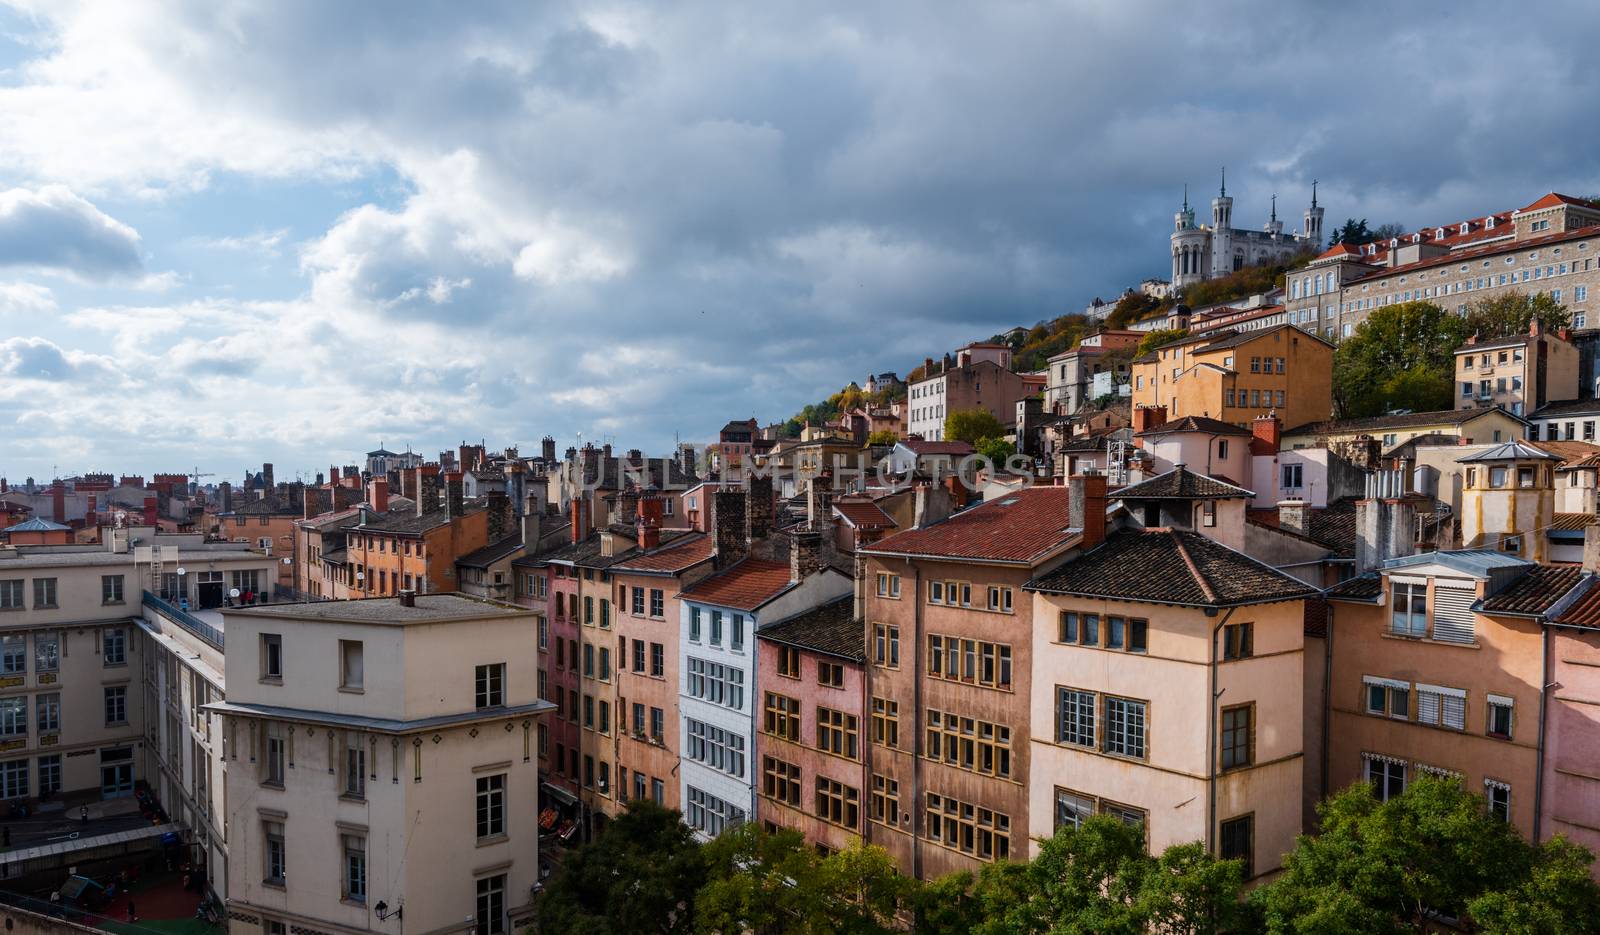 Overlooking the City of Lyon by jfbenning